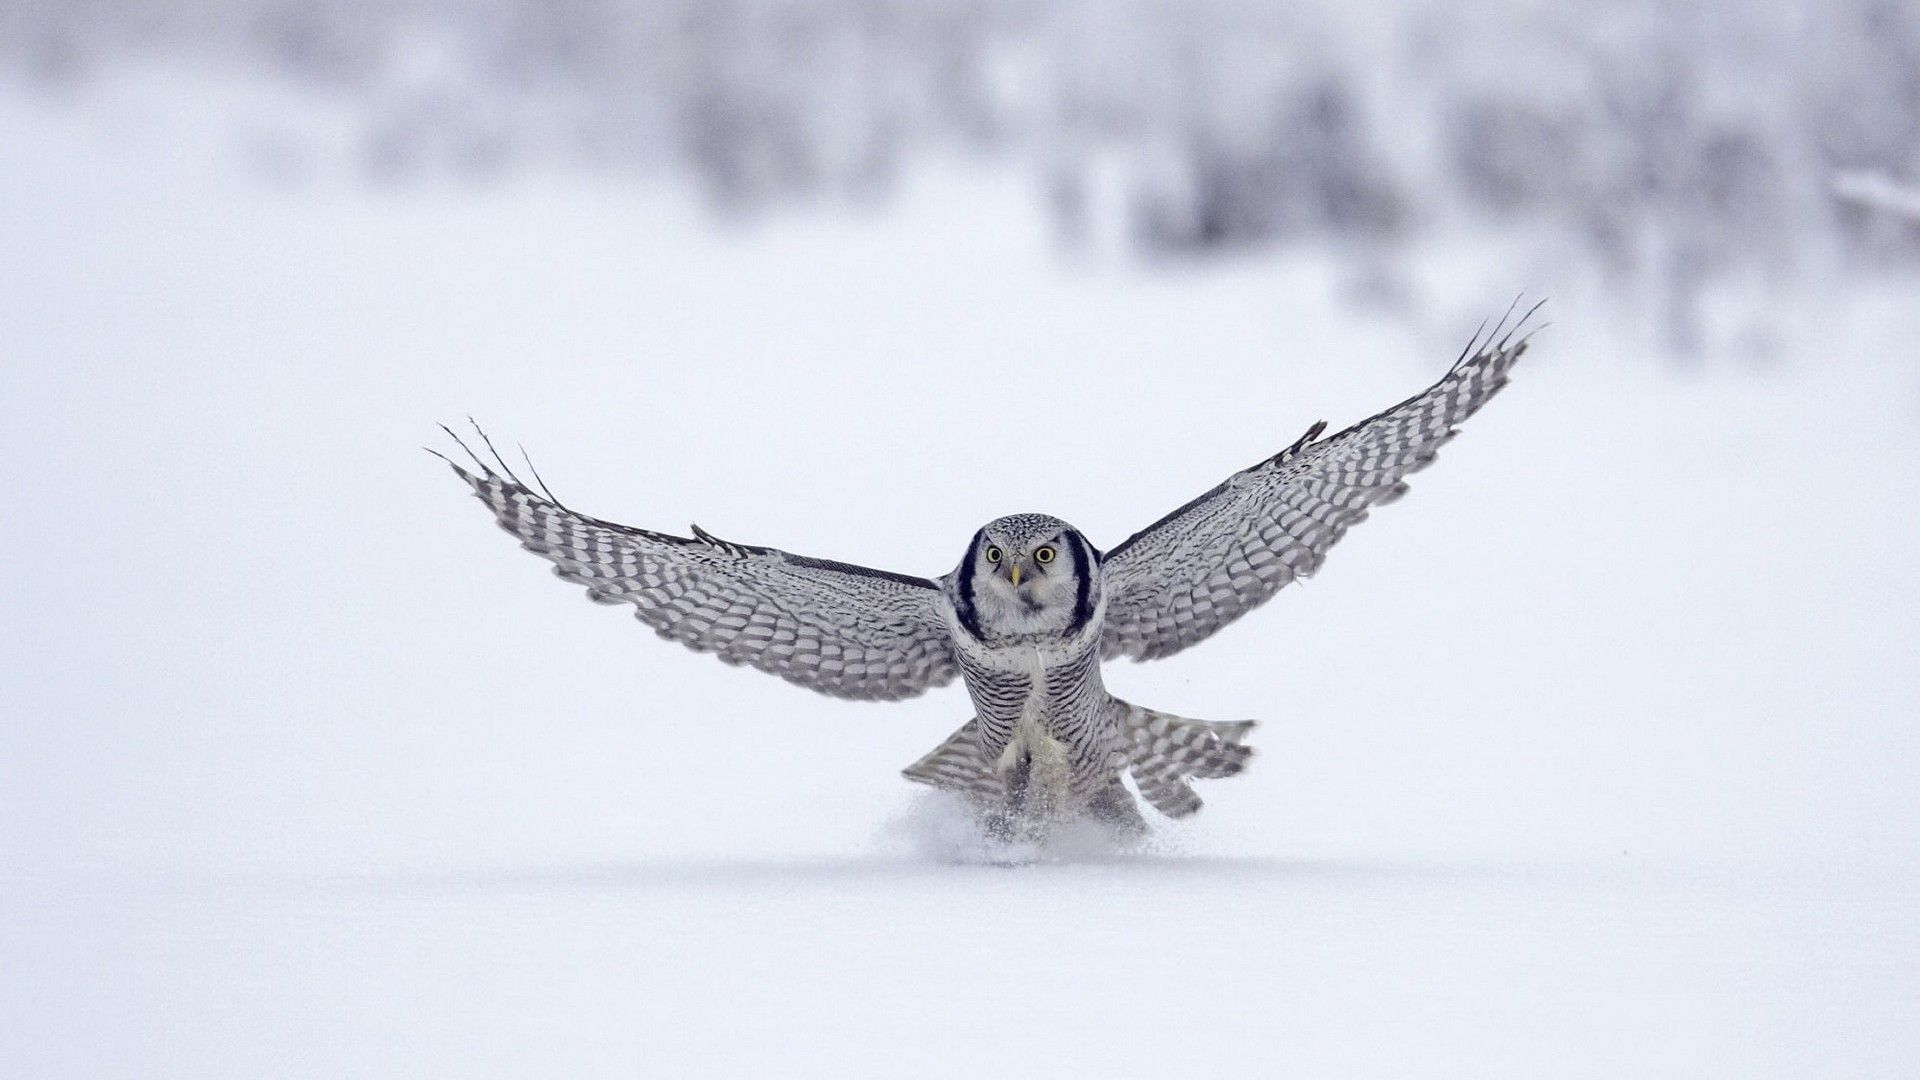 White Owl Latest New Bird Images for Desktop Background HD